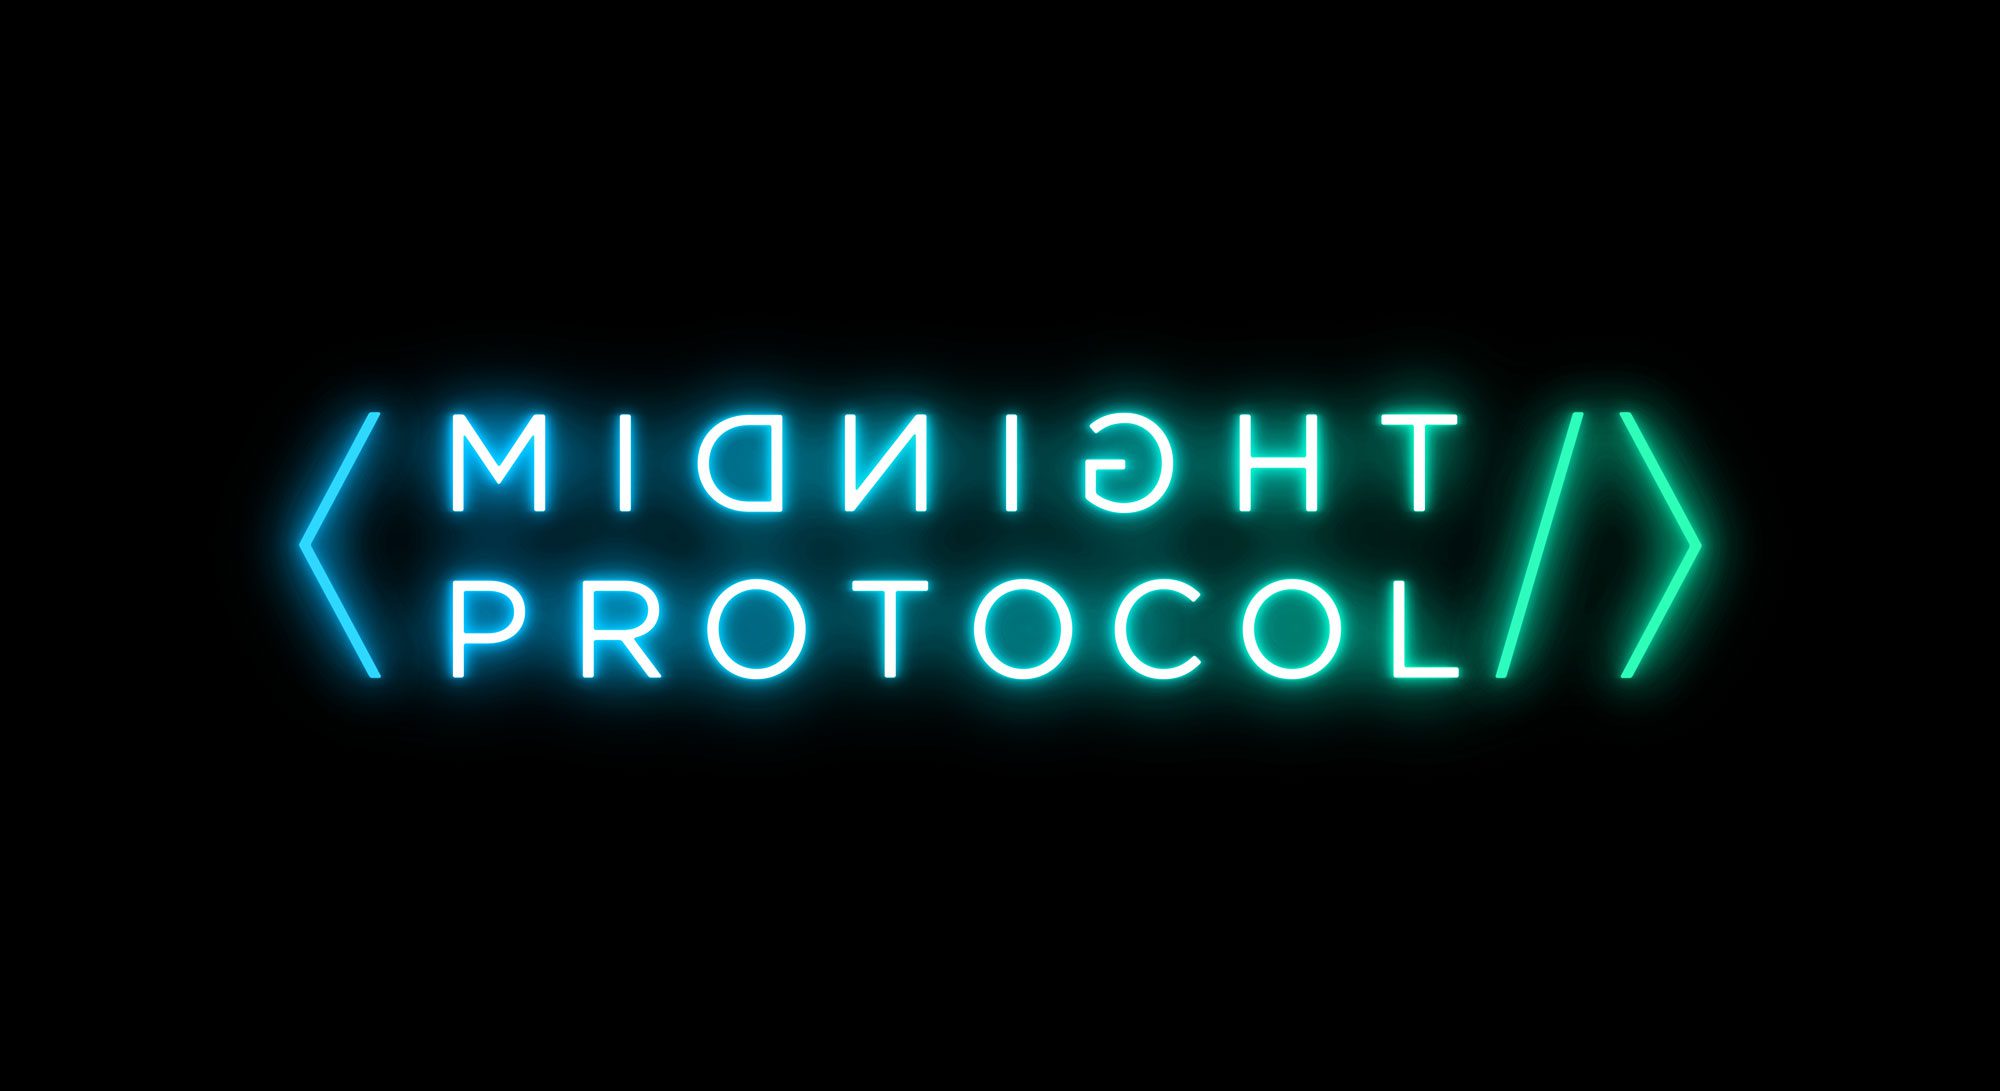 Midnight Protocol: Hacking Game meets Science Fiction